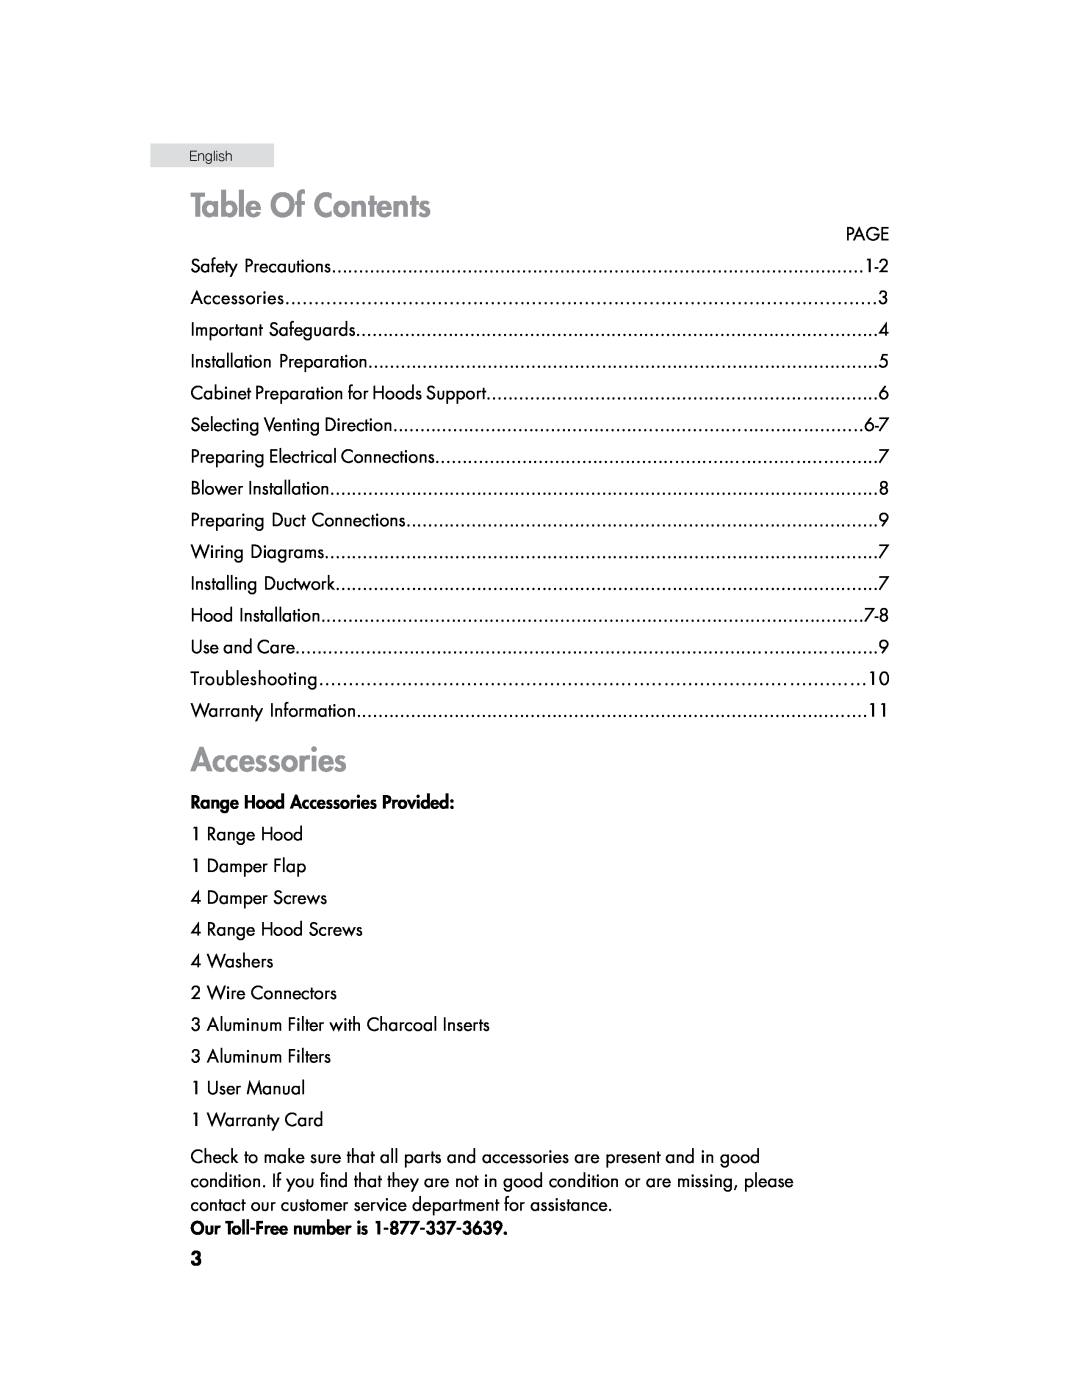 Haier HHX6130 user manual Table Of Contents, Accessories 